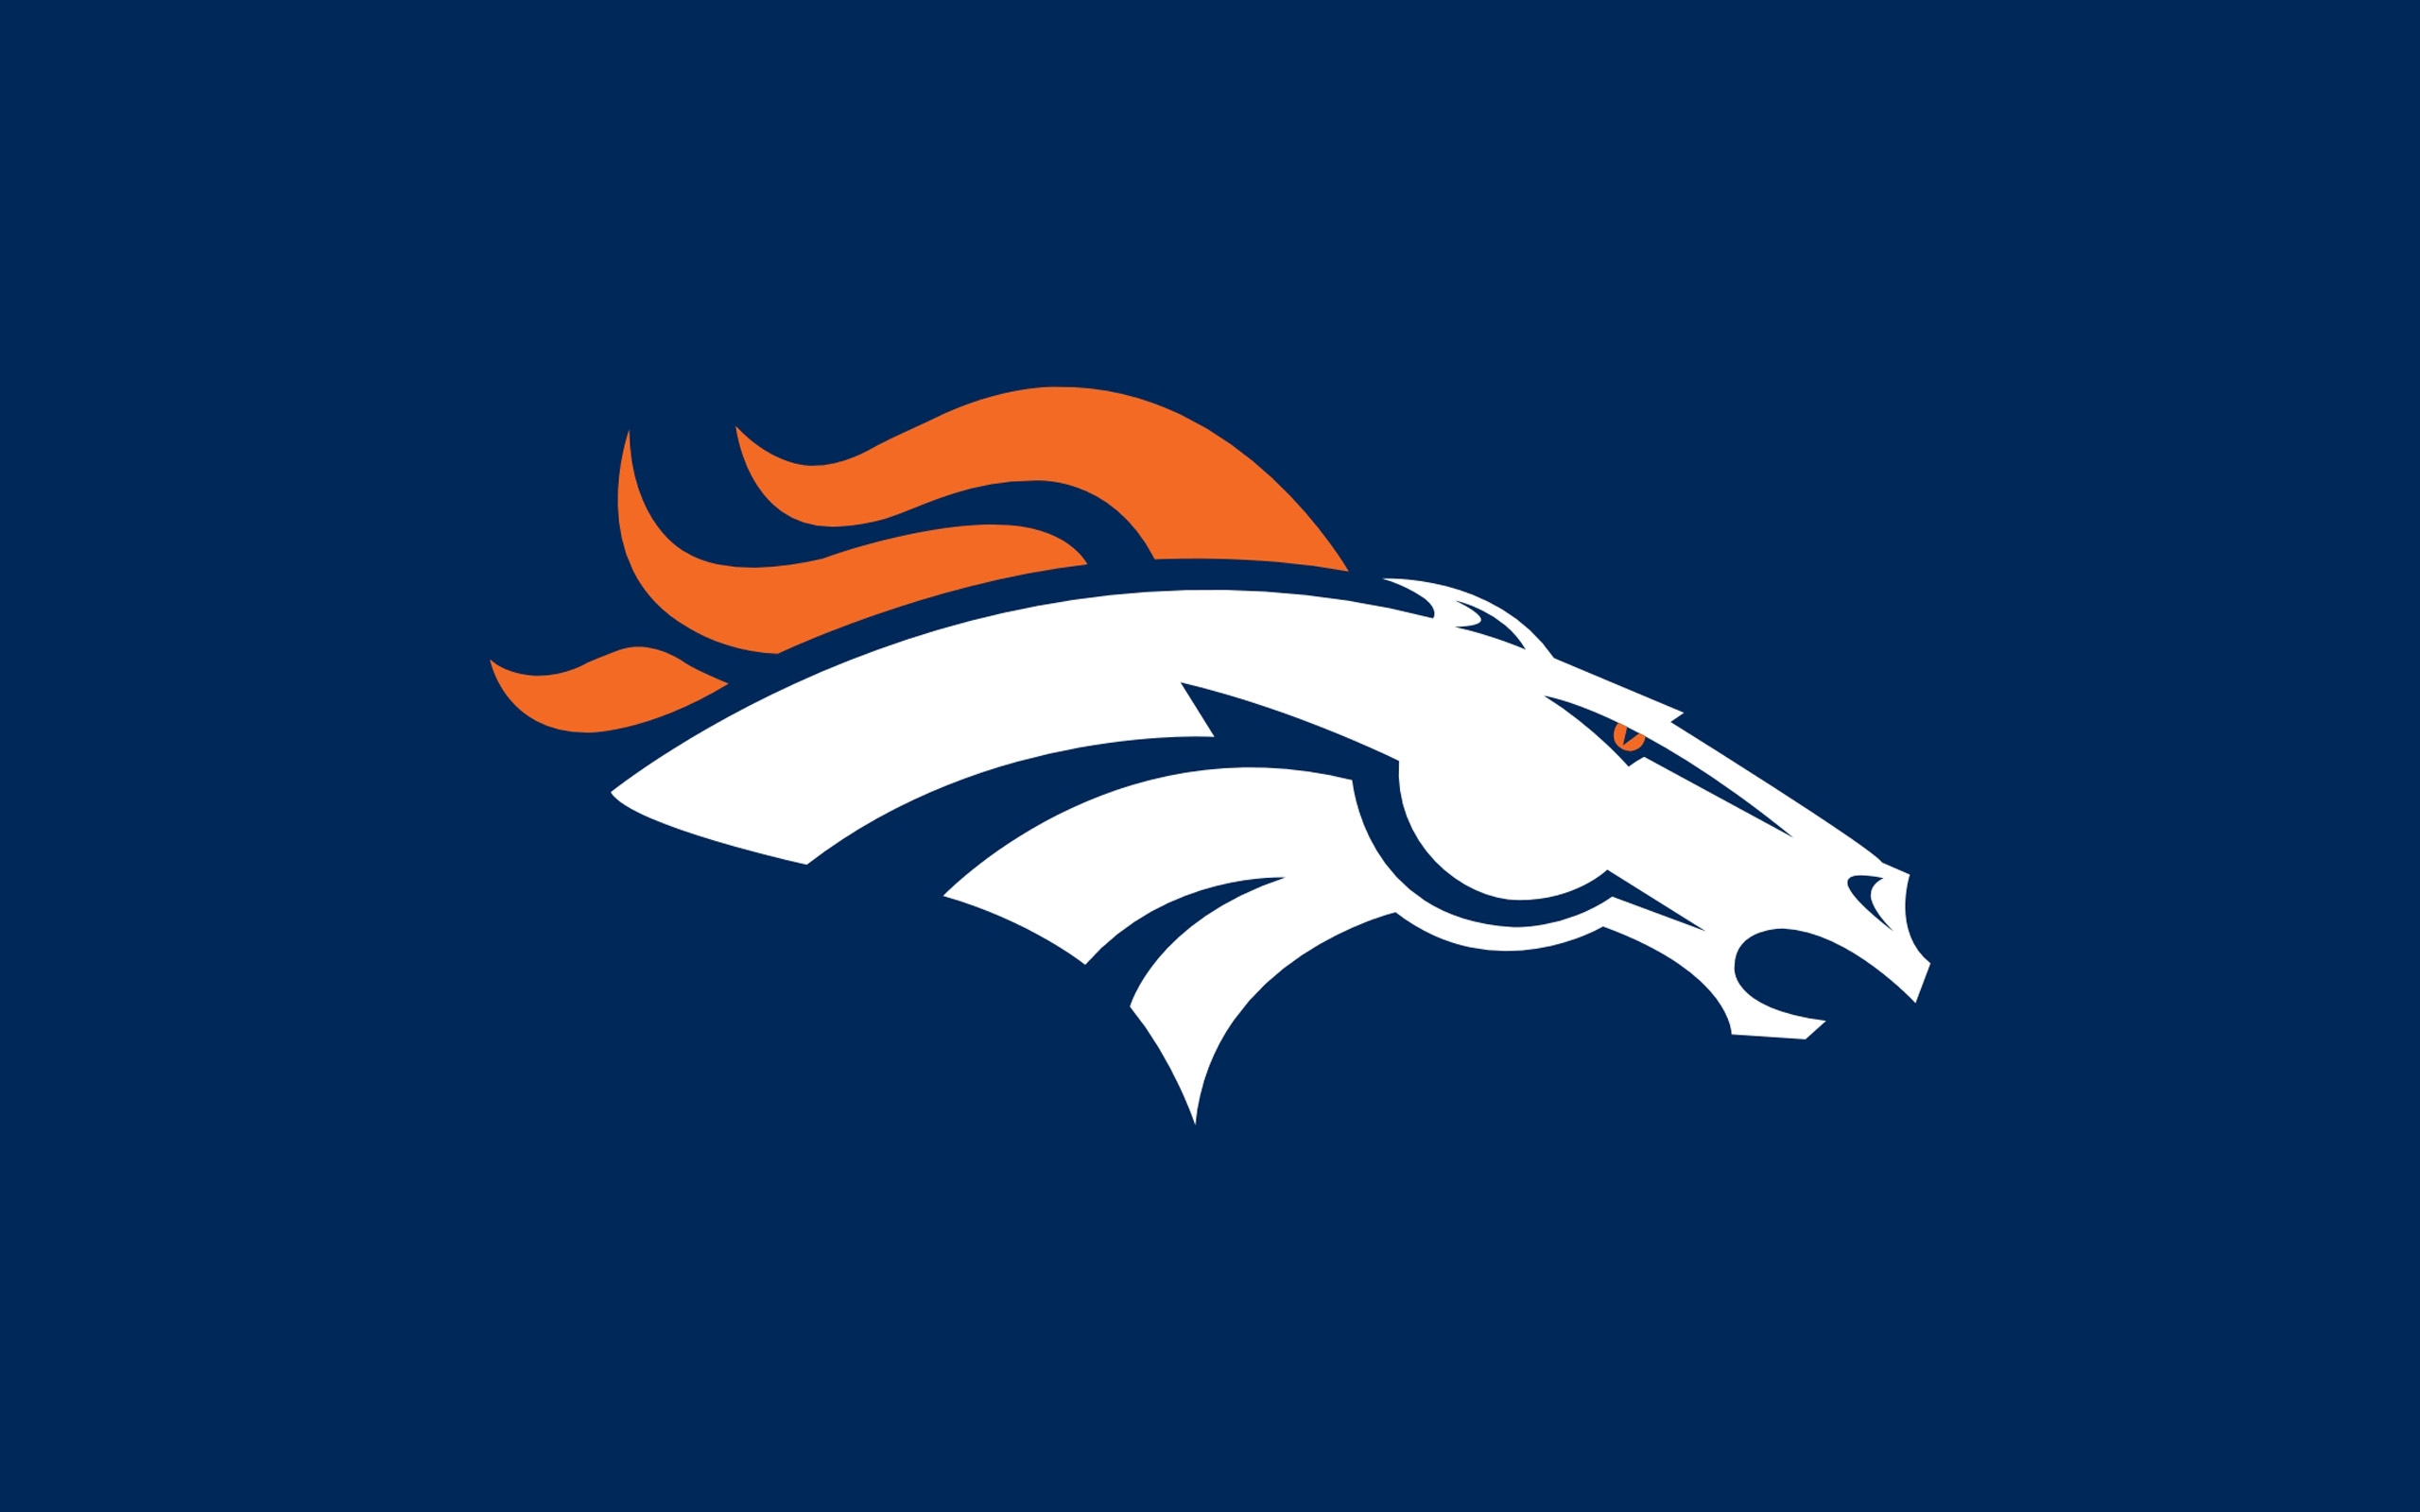 You Like This Denver Broncos Wallpaper HD As Much We Do